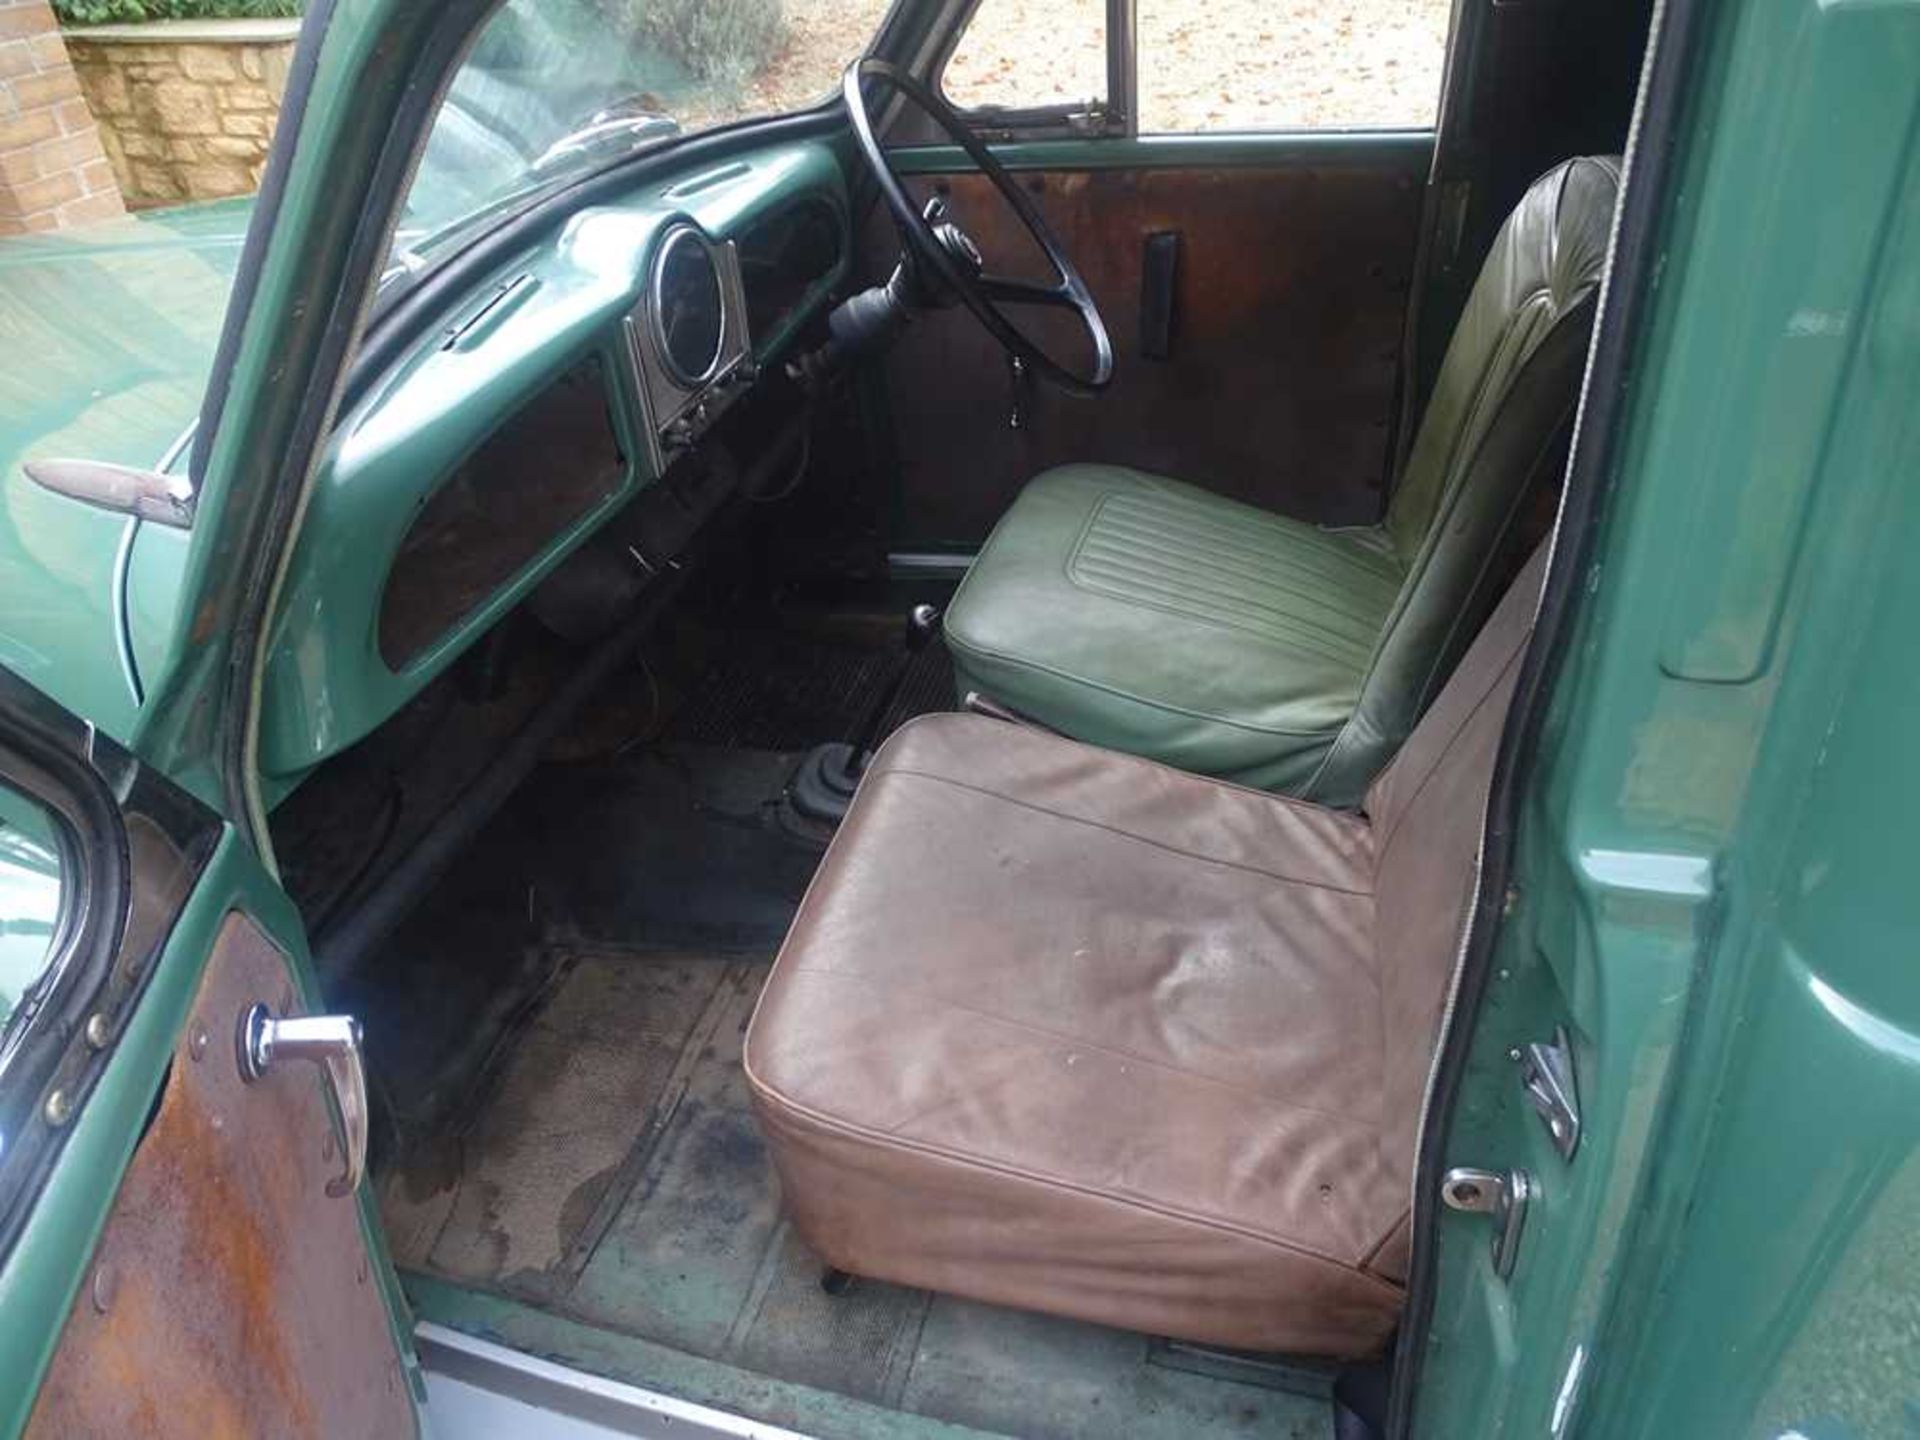 1970 Austin 6 CWT Van Single Family Ownership From New - Image 30 of 45